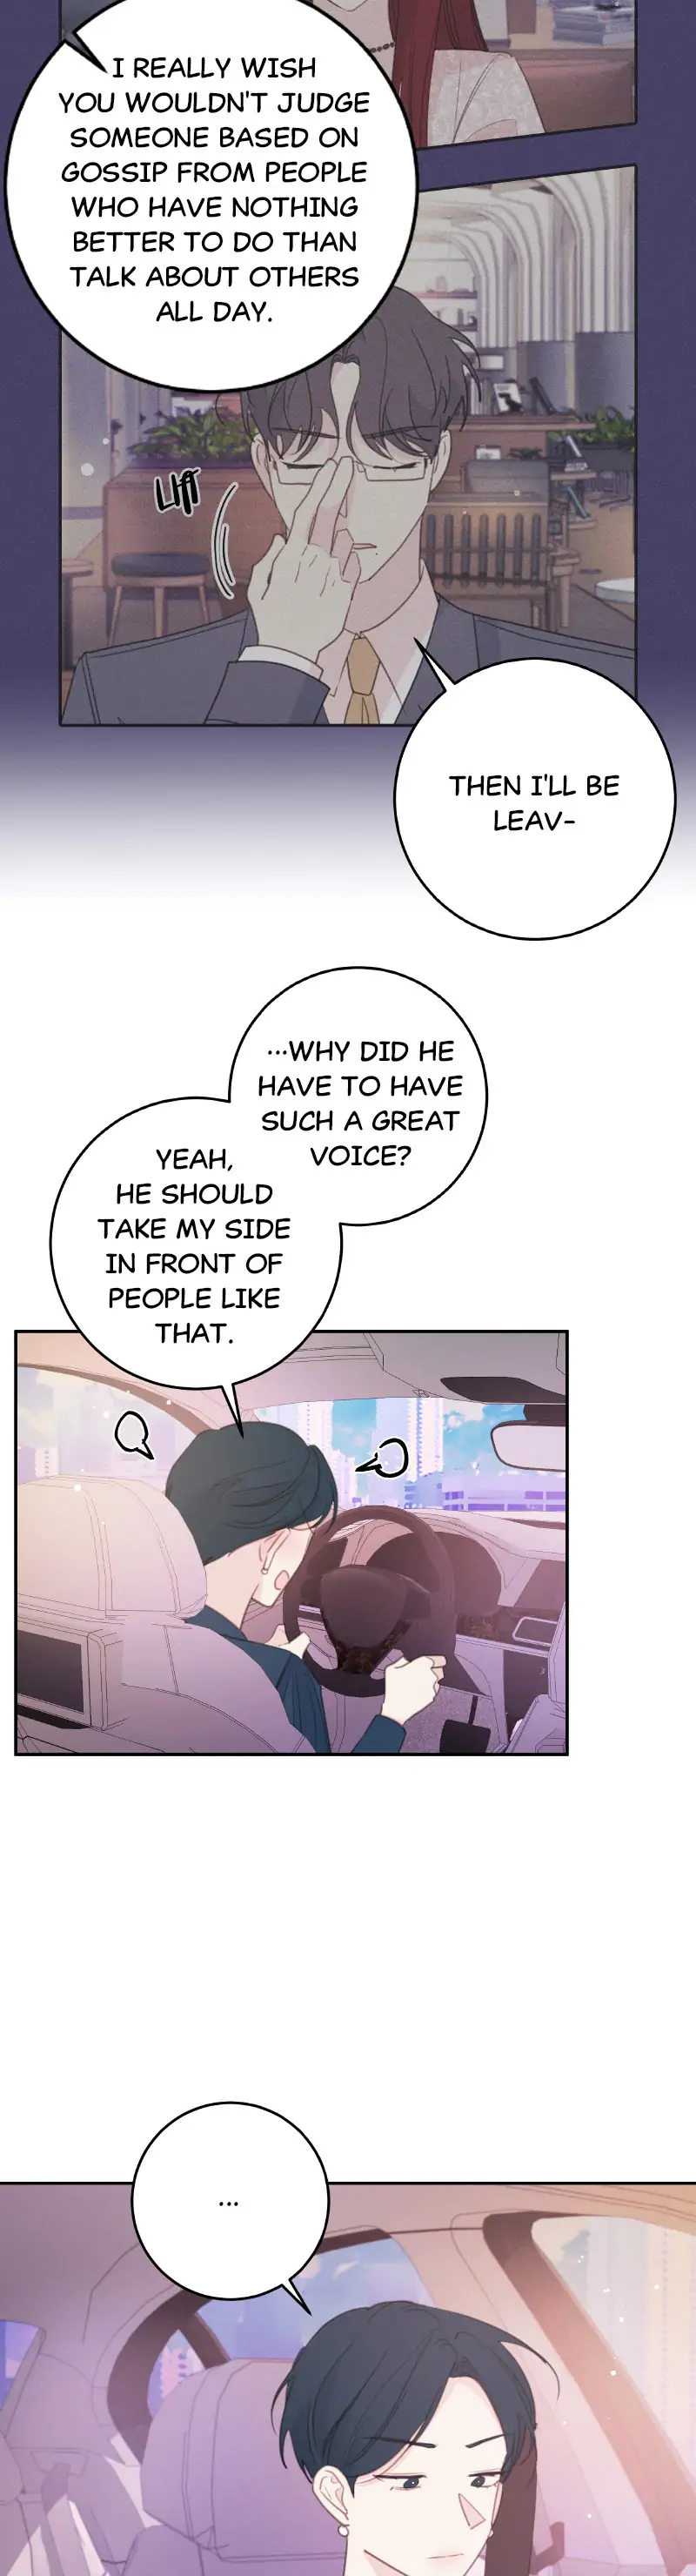 Today Living With You - Page 2